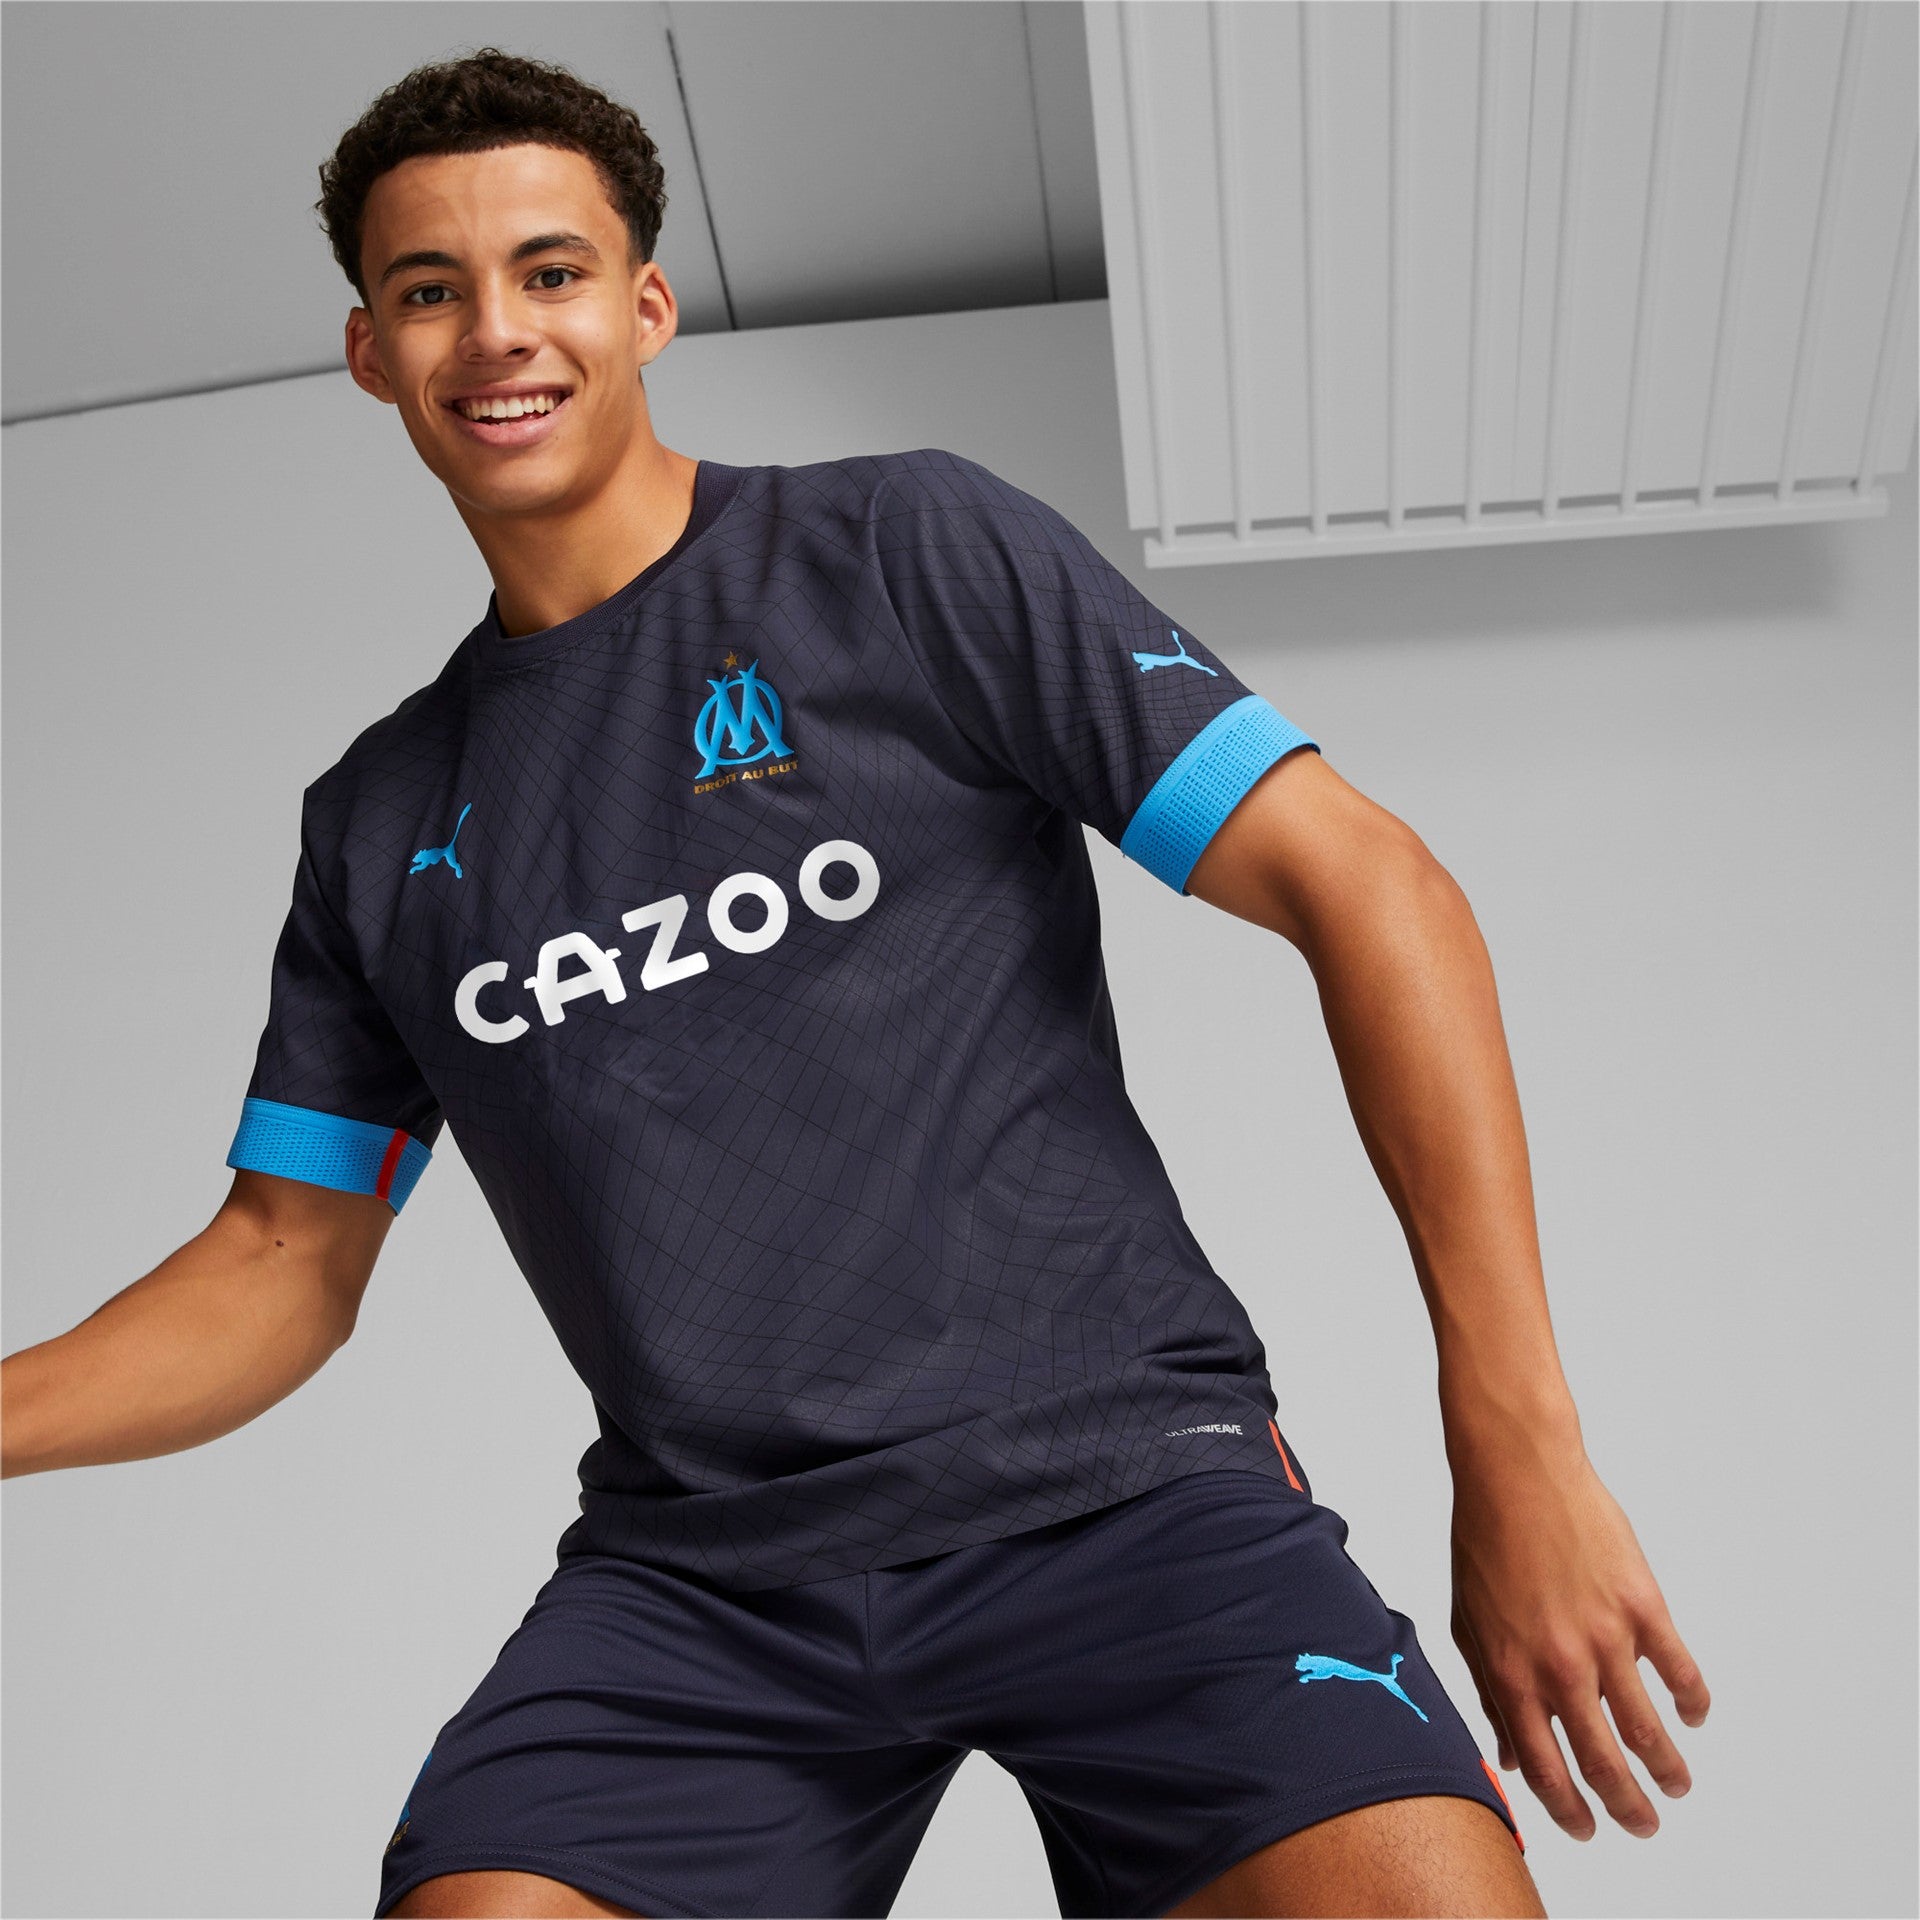 Maillot OM Away 21/22 PUMA adulte Homme